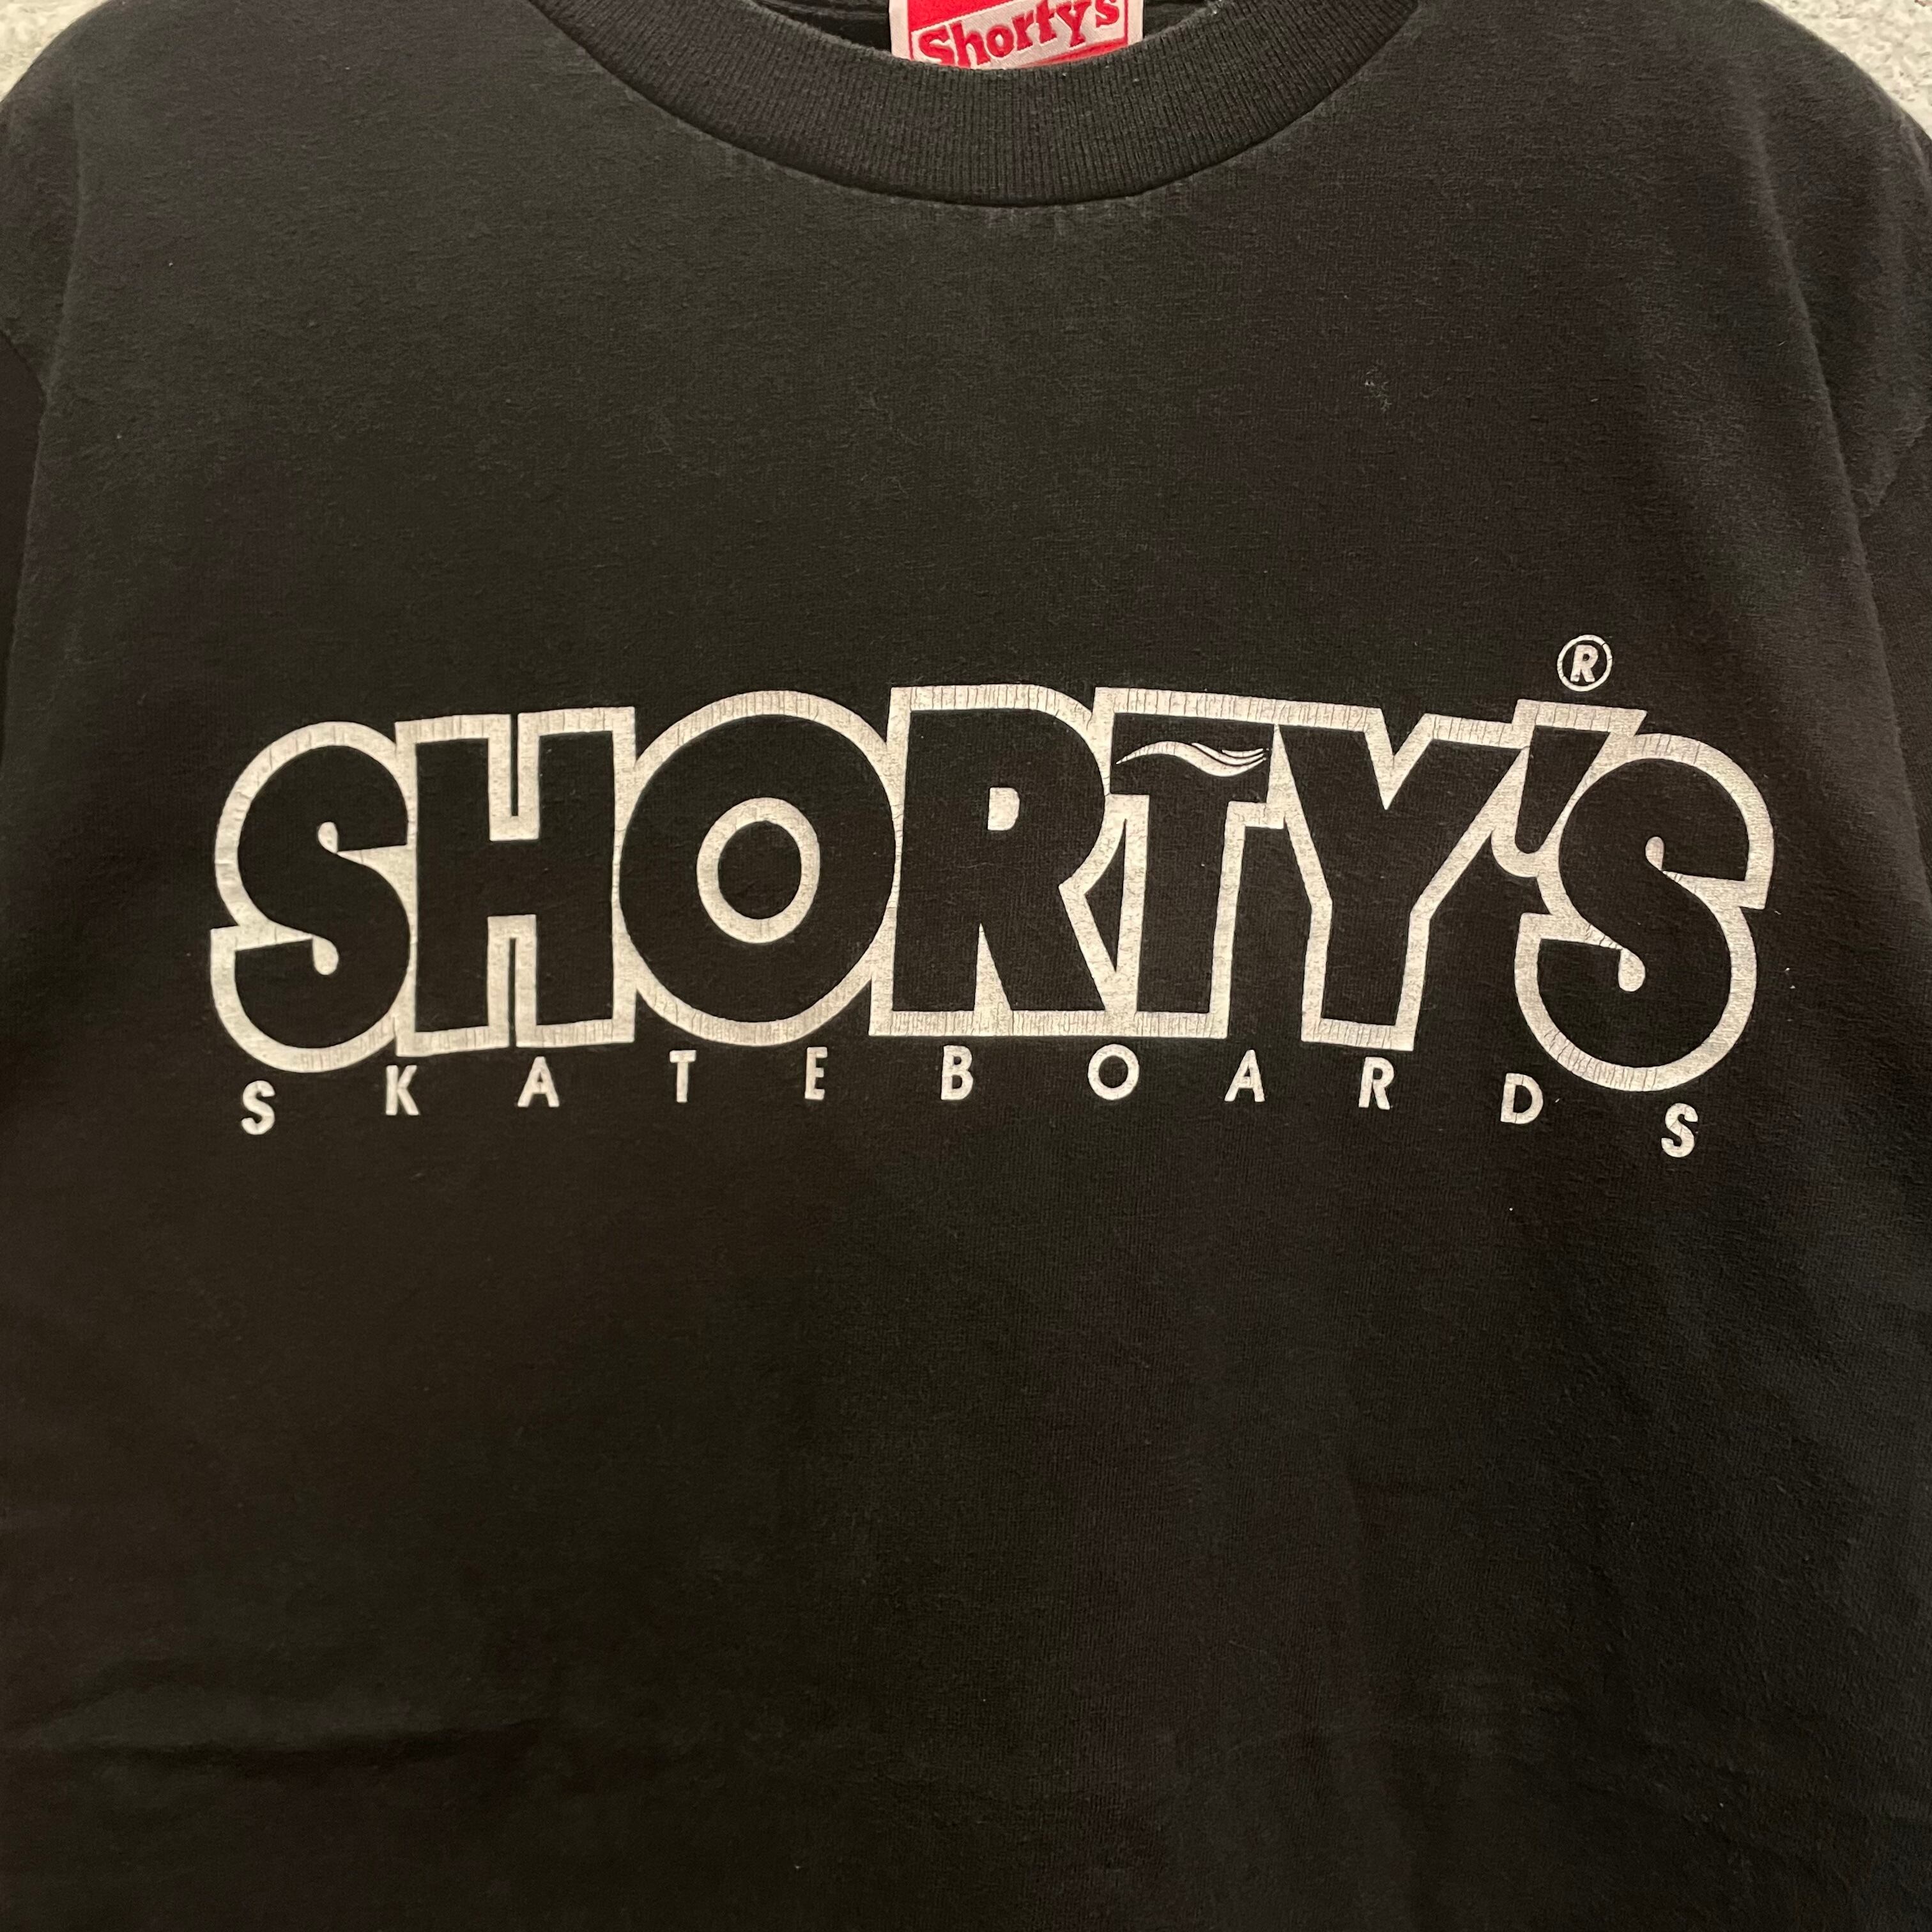 90’~00’s  SHORTY´S  made in Jamaica